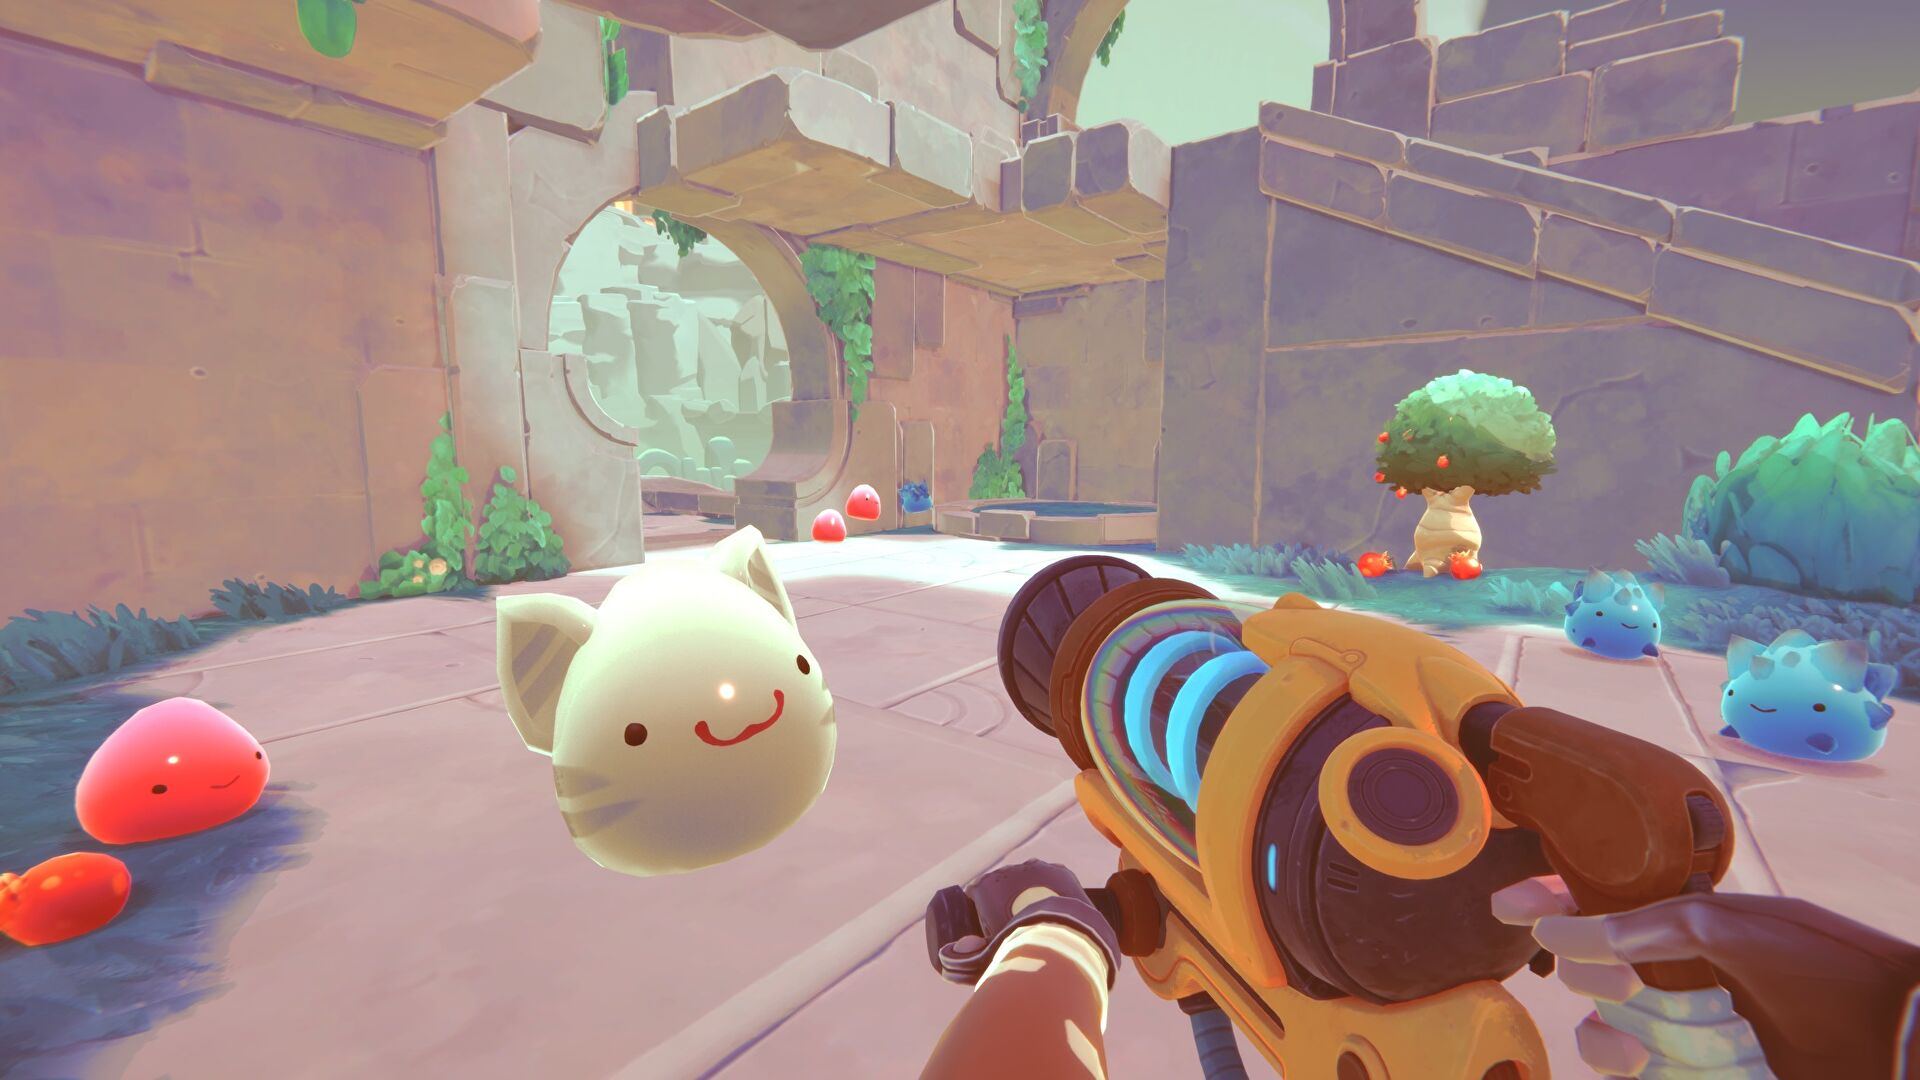 Does Slime Rancher 2 Have Multiplayer?